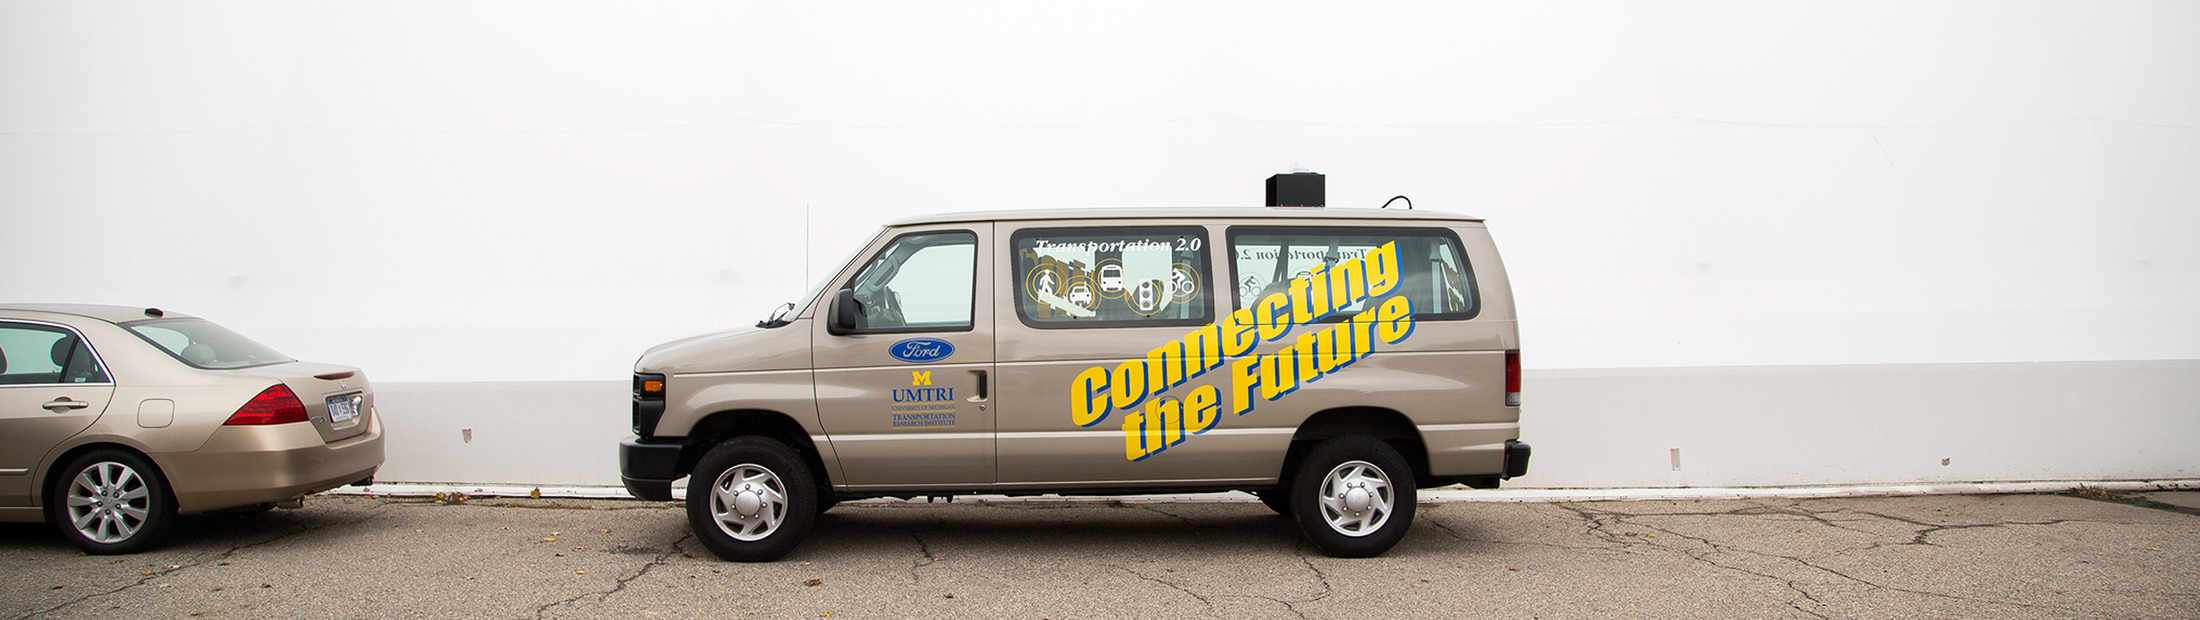 A parked van with a decal reading "Connecting the Future"